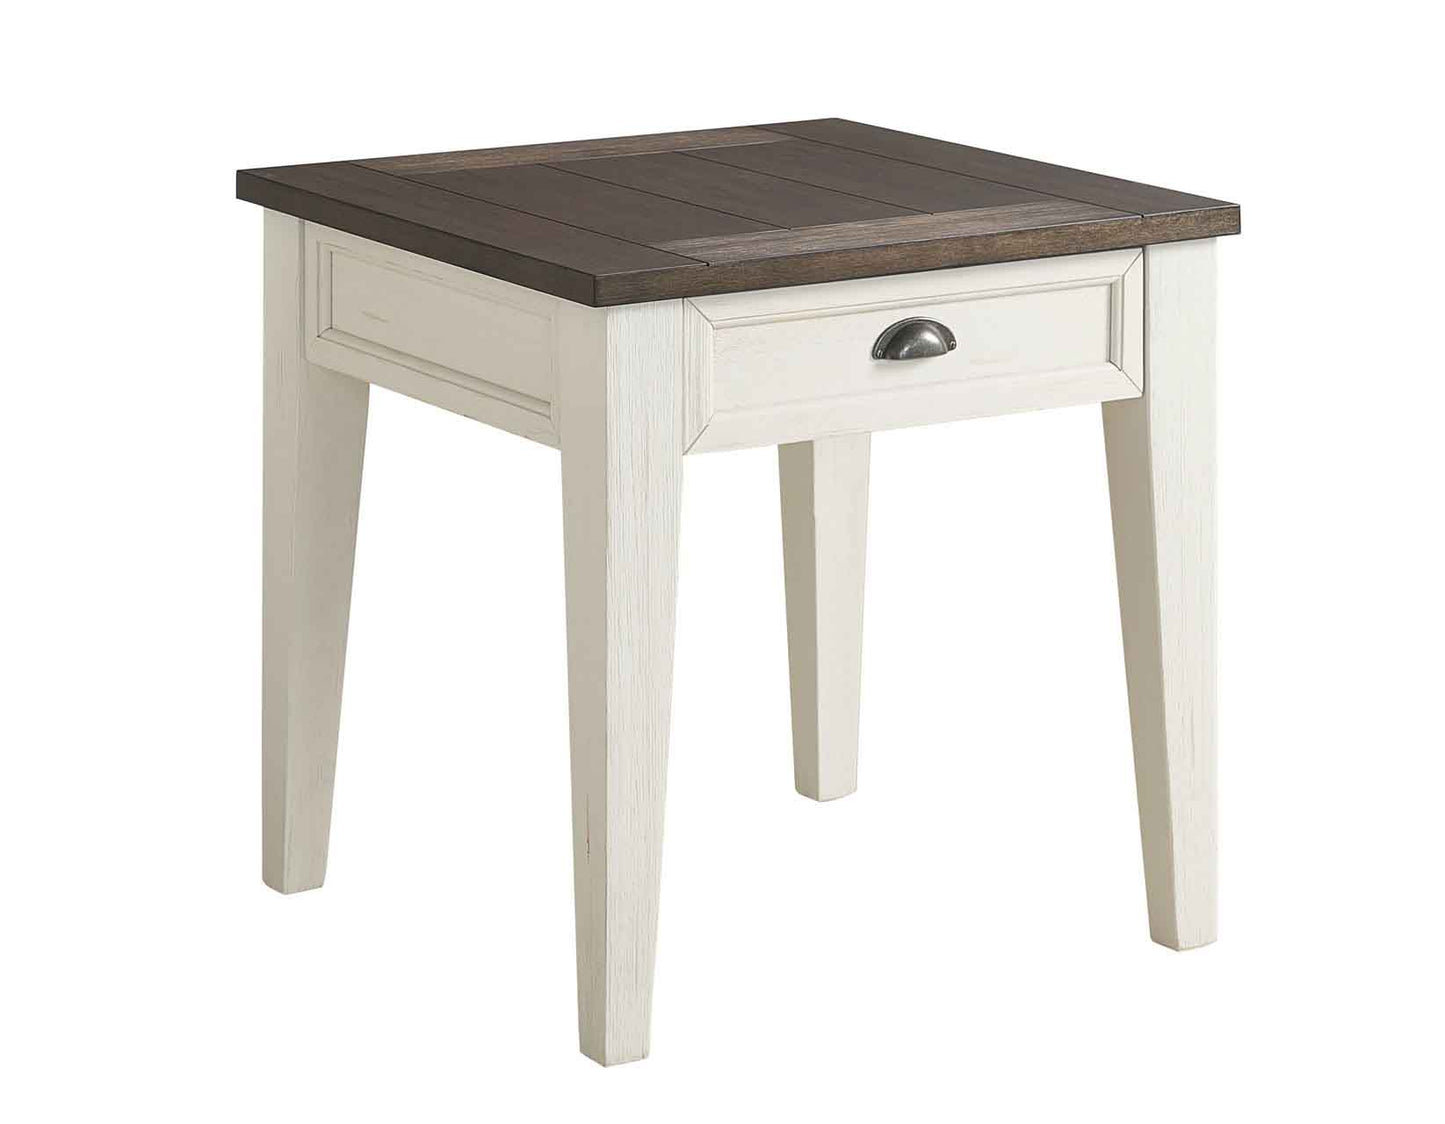 Cayla End Table by Steve Silver